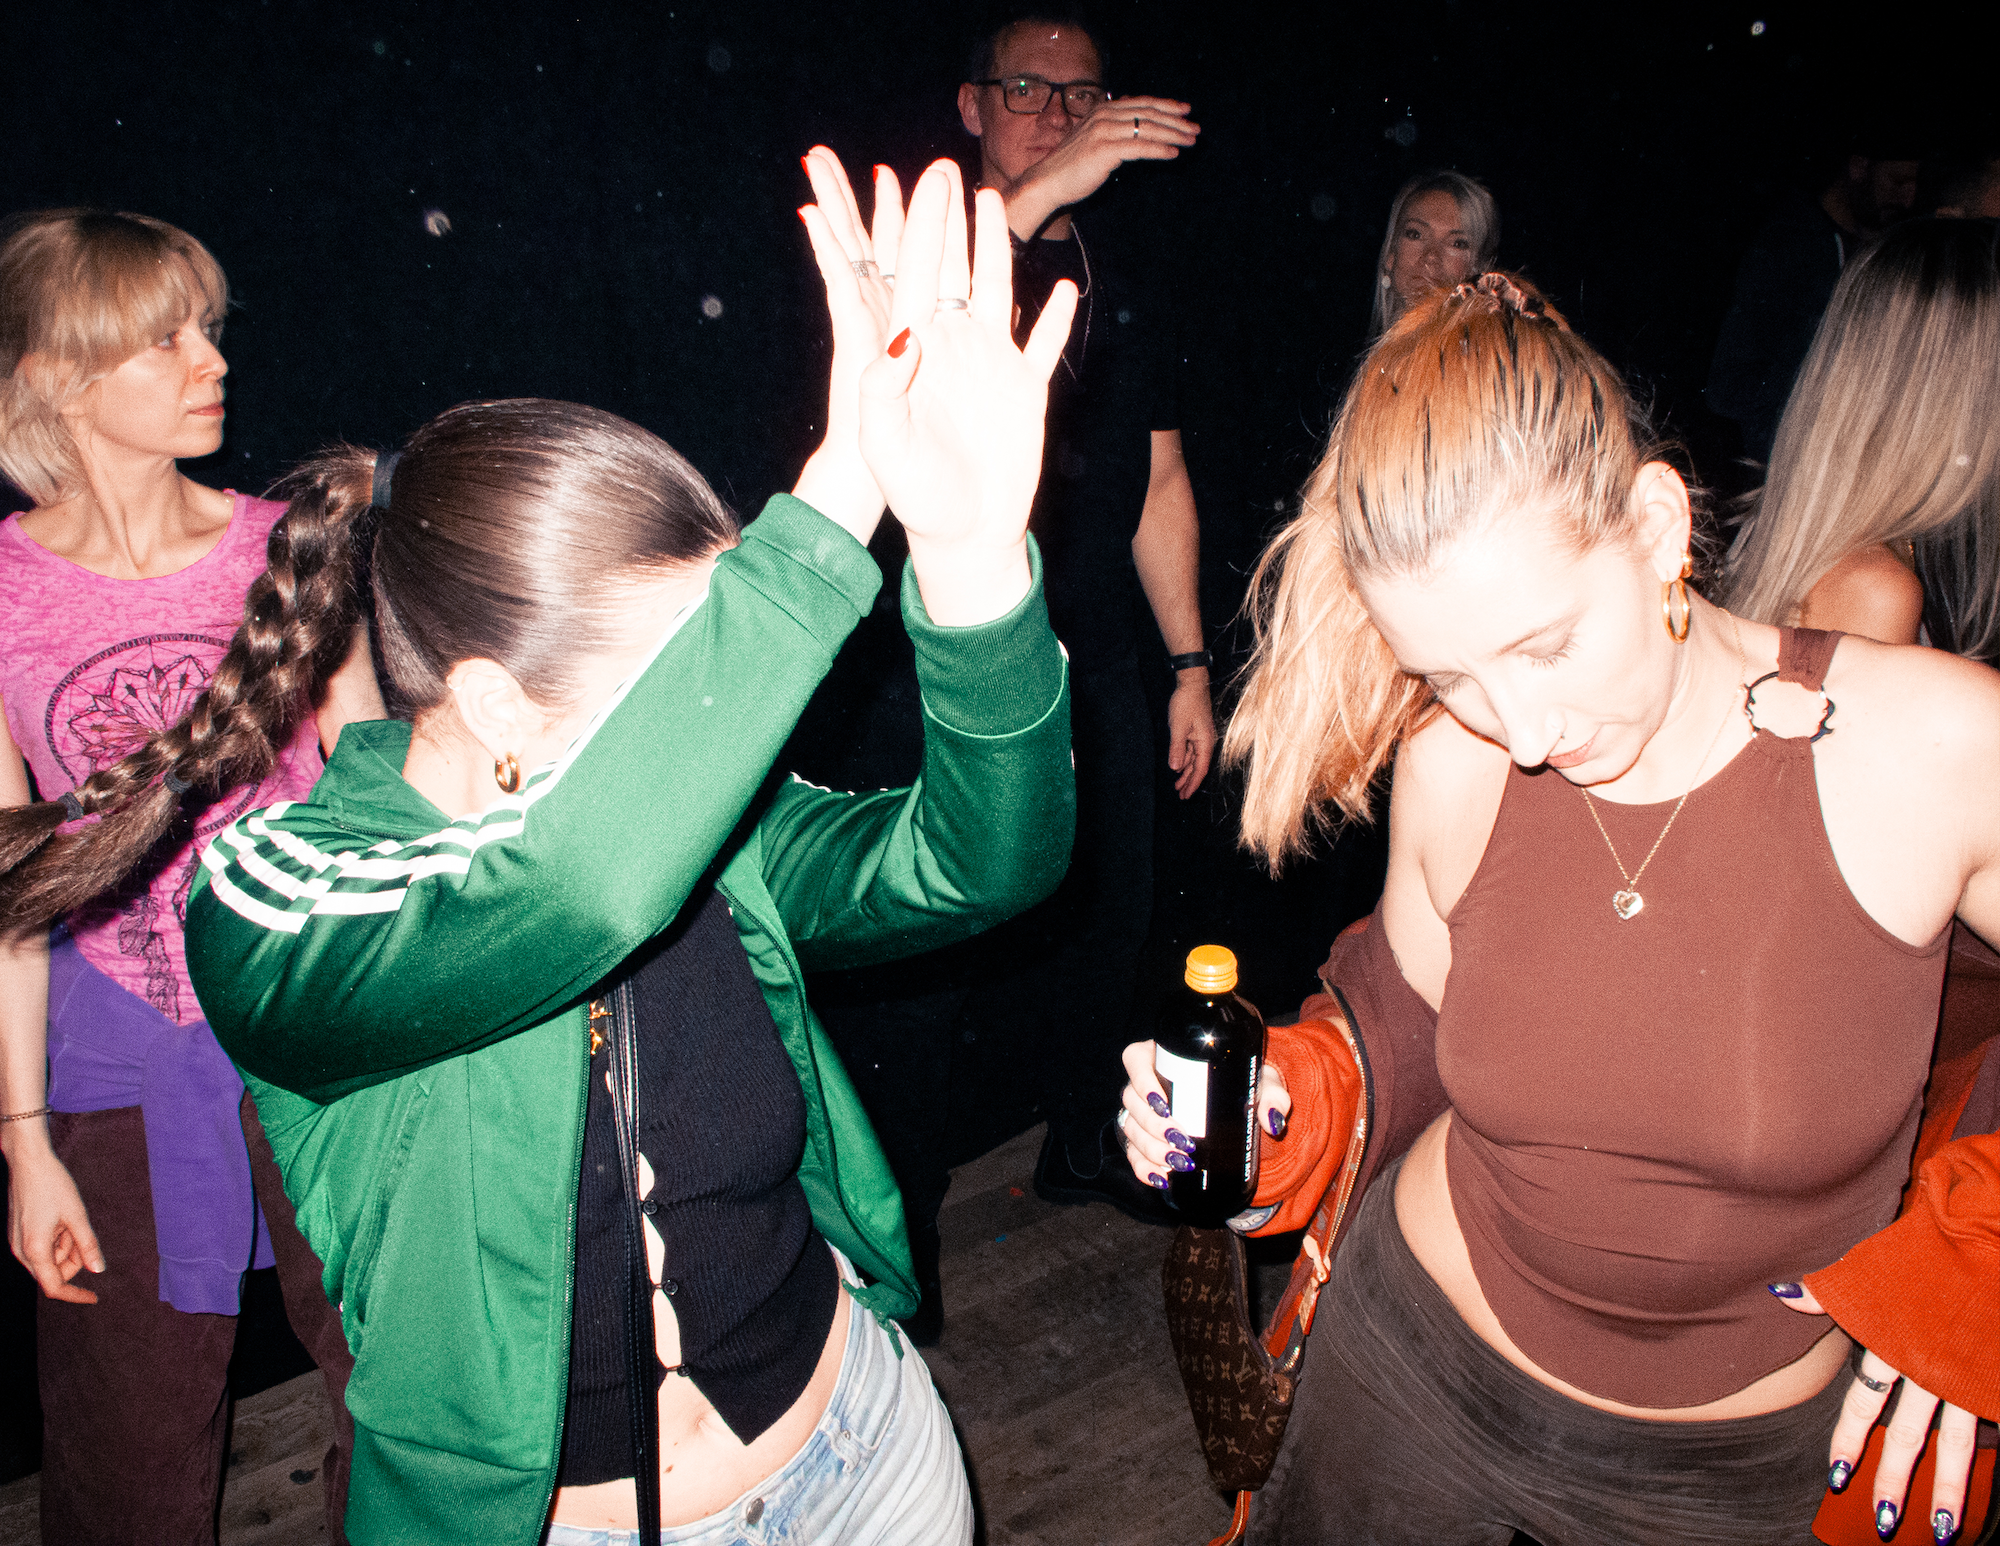 A photo of two girls dancing in a club, one is wearing a green adidas tracksuit top, the other is wearing a brown vest top holding a kombucha bottle.